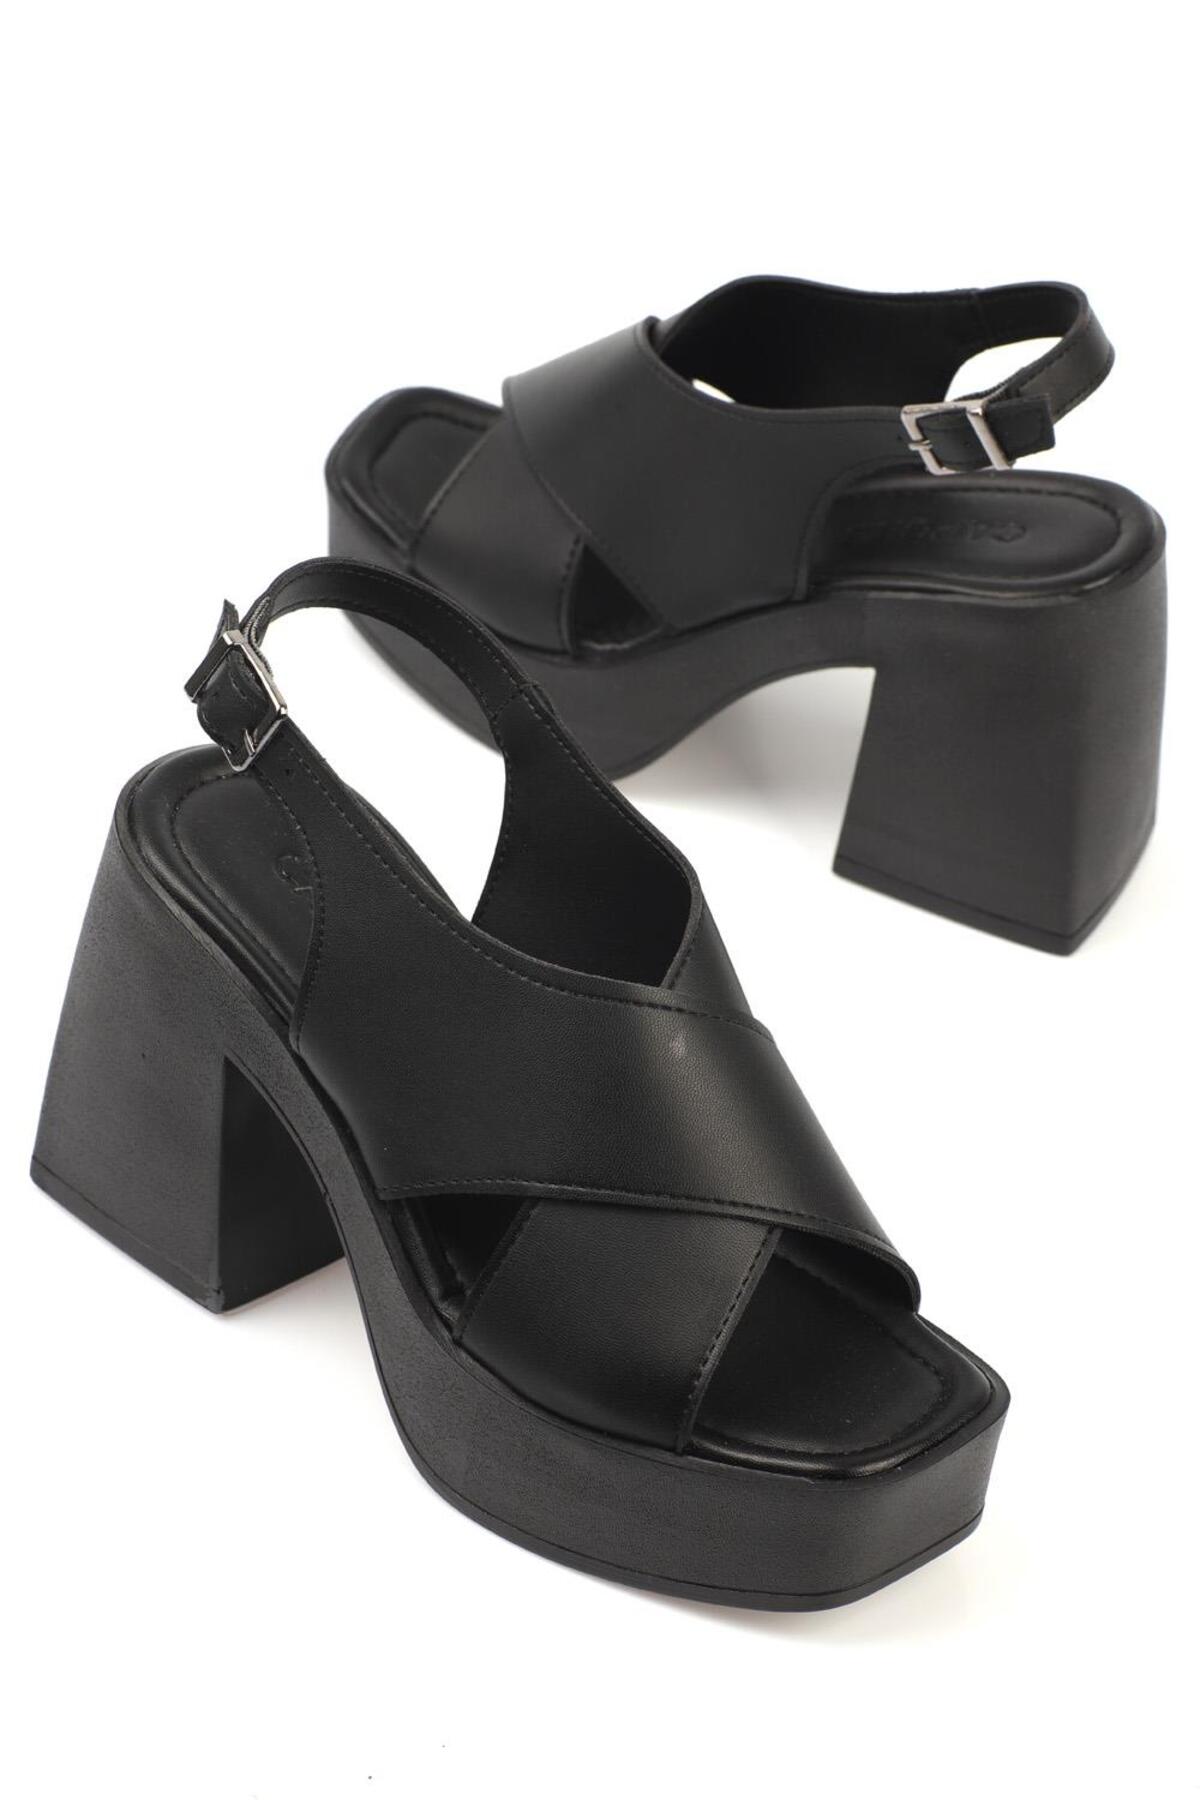 Levně Capone Outfitters Capone Women's Chunky Toe Crossover Wide Strap Platform Heels Black Women's Sandals.